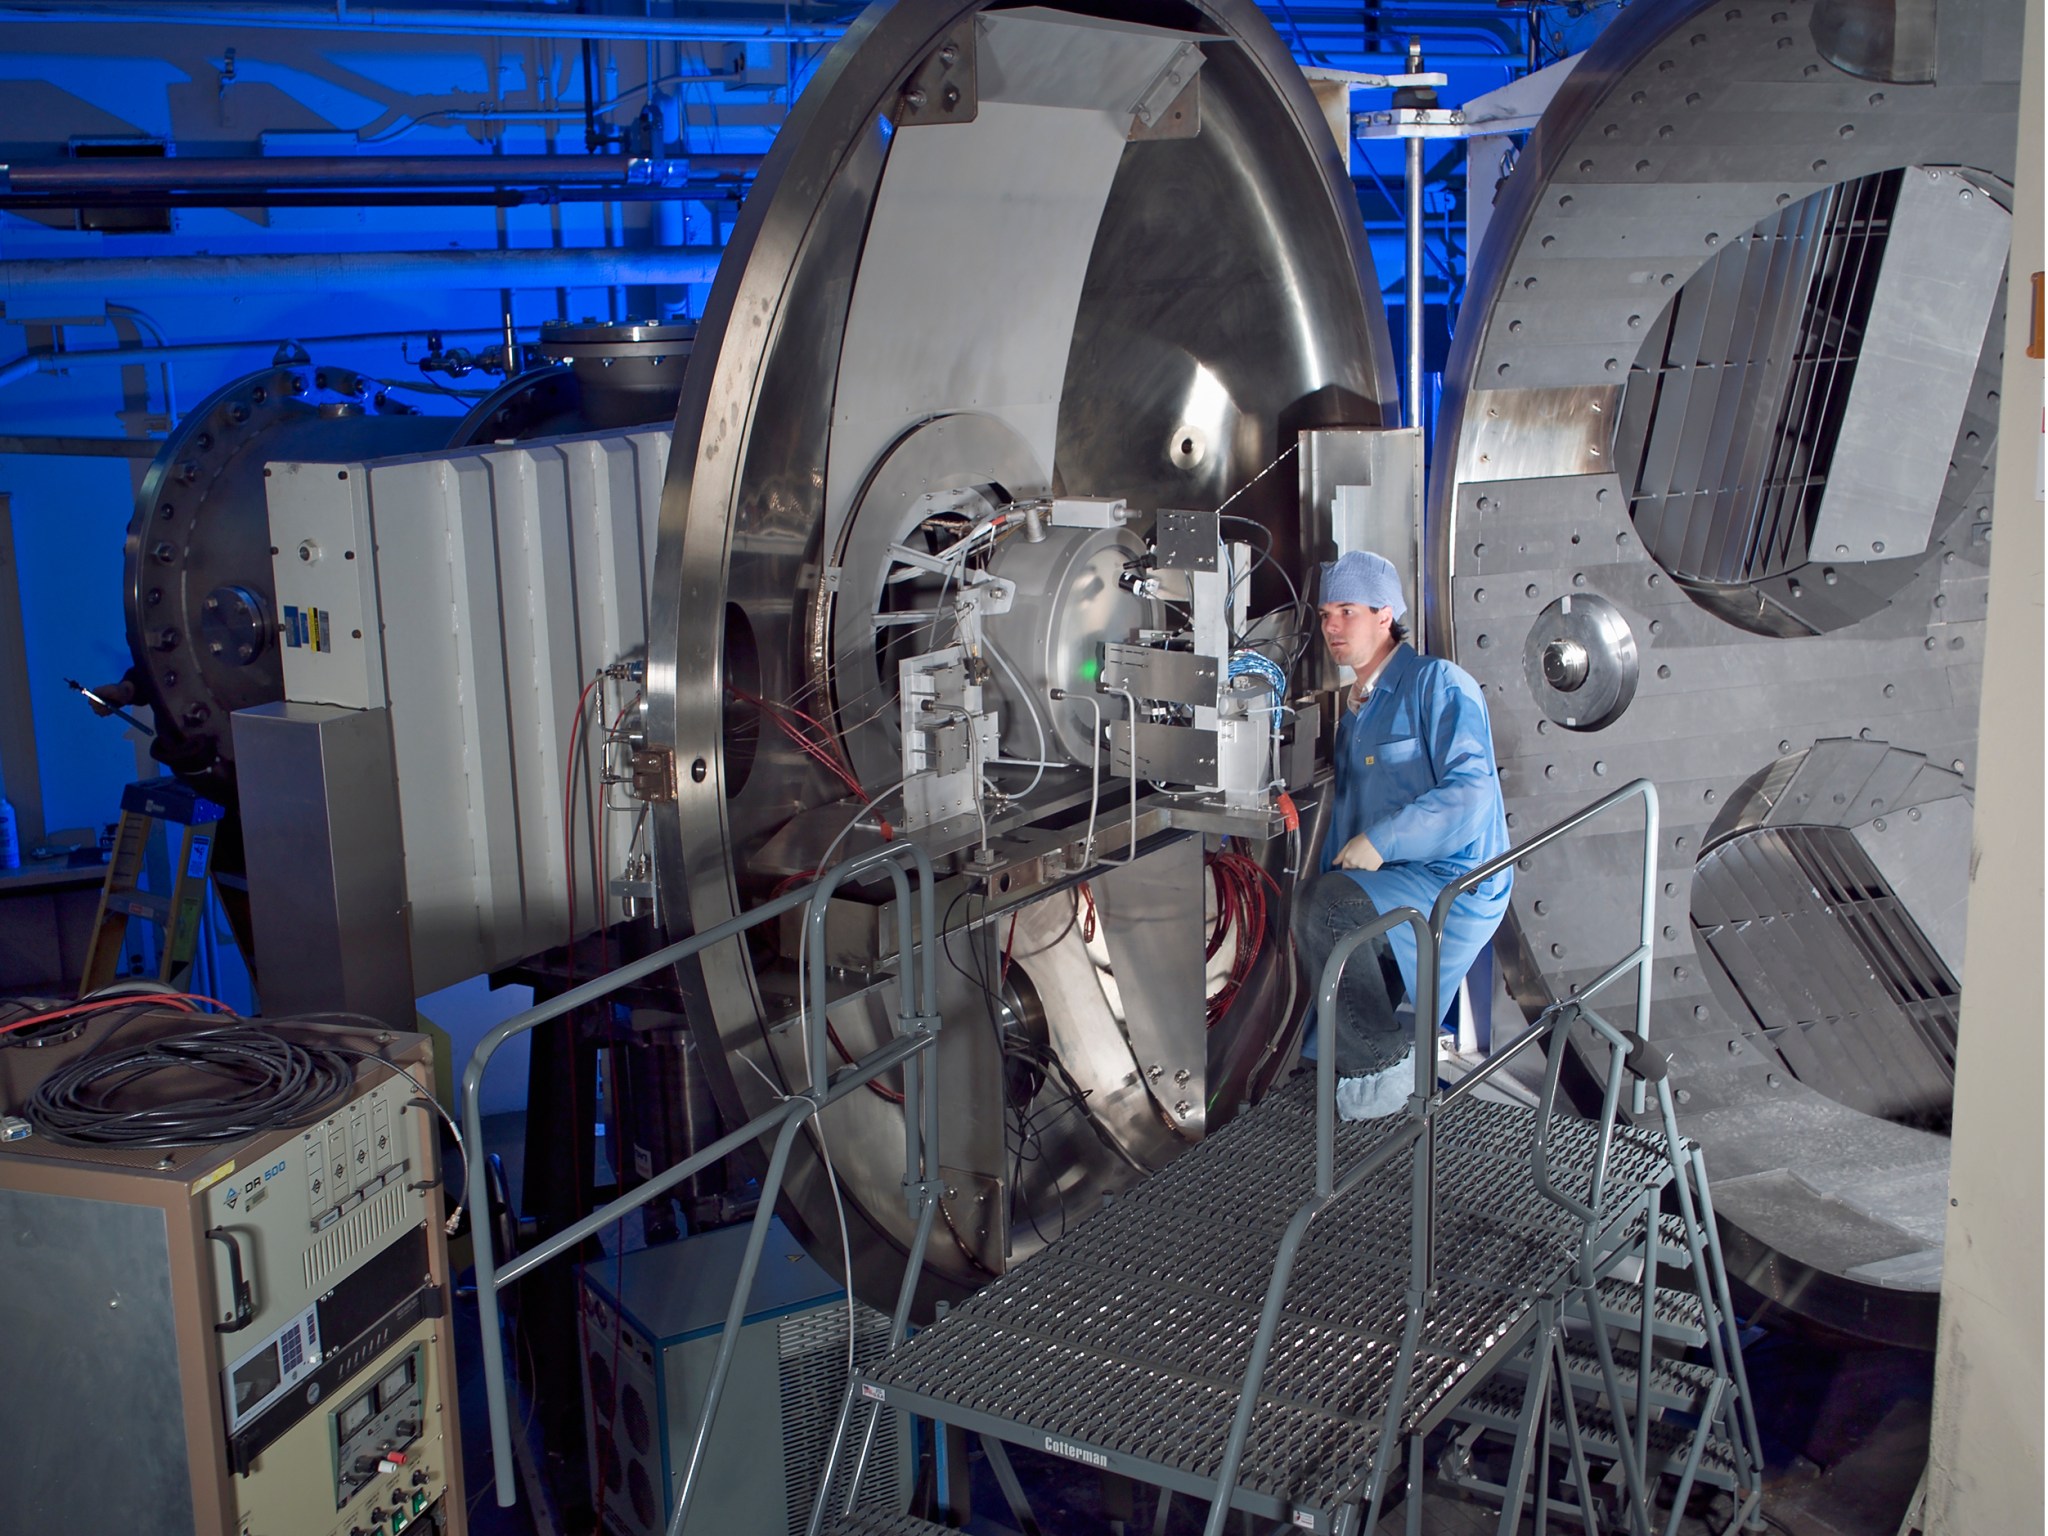 a researcher wearing a cleansuit, stands on a metal staircase to view a test article.